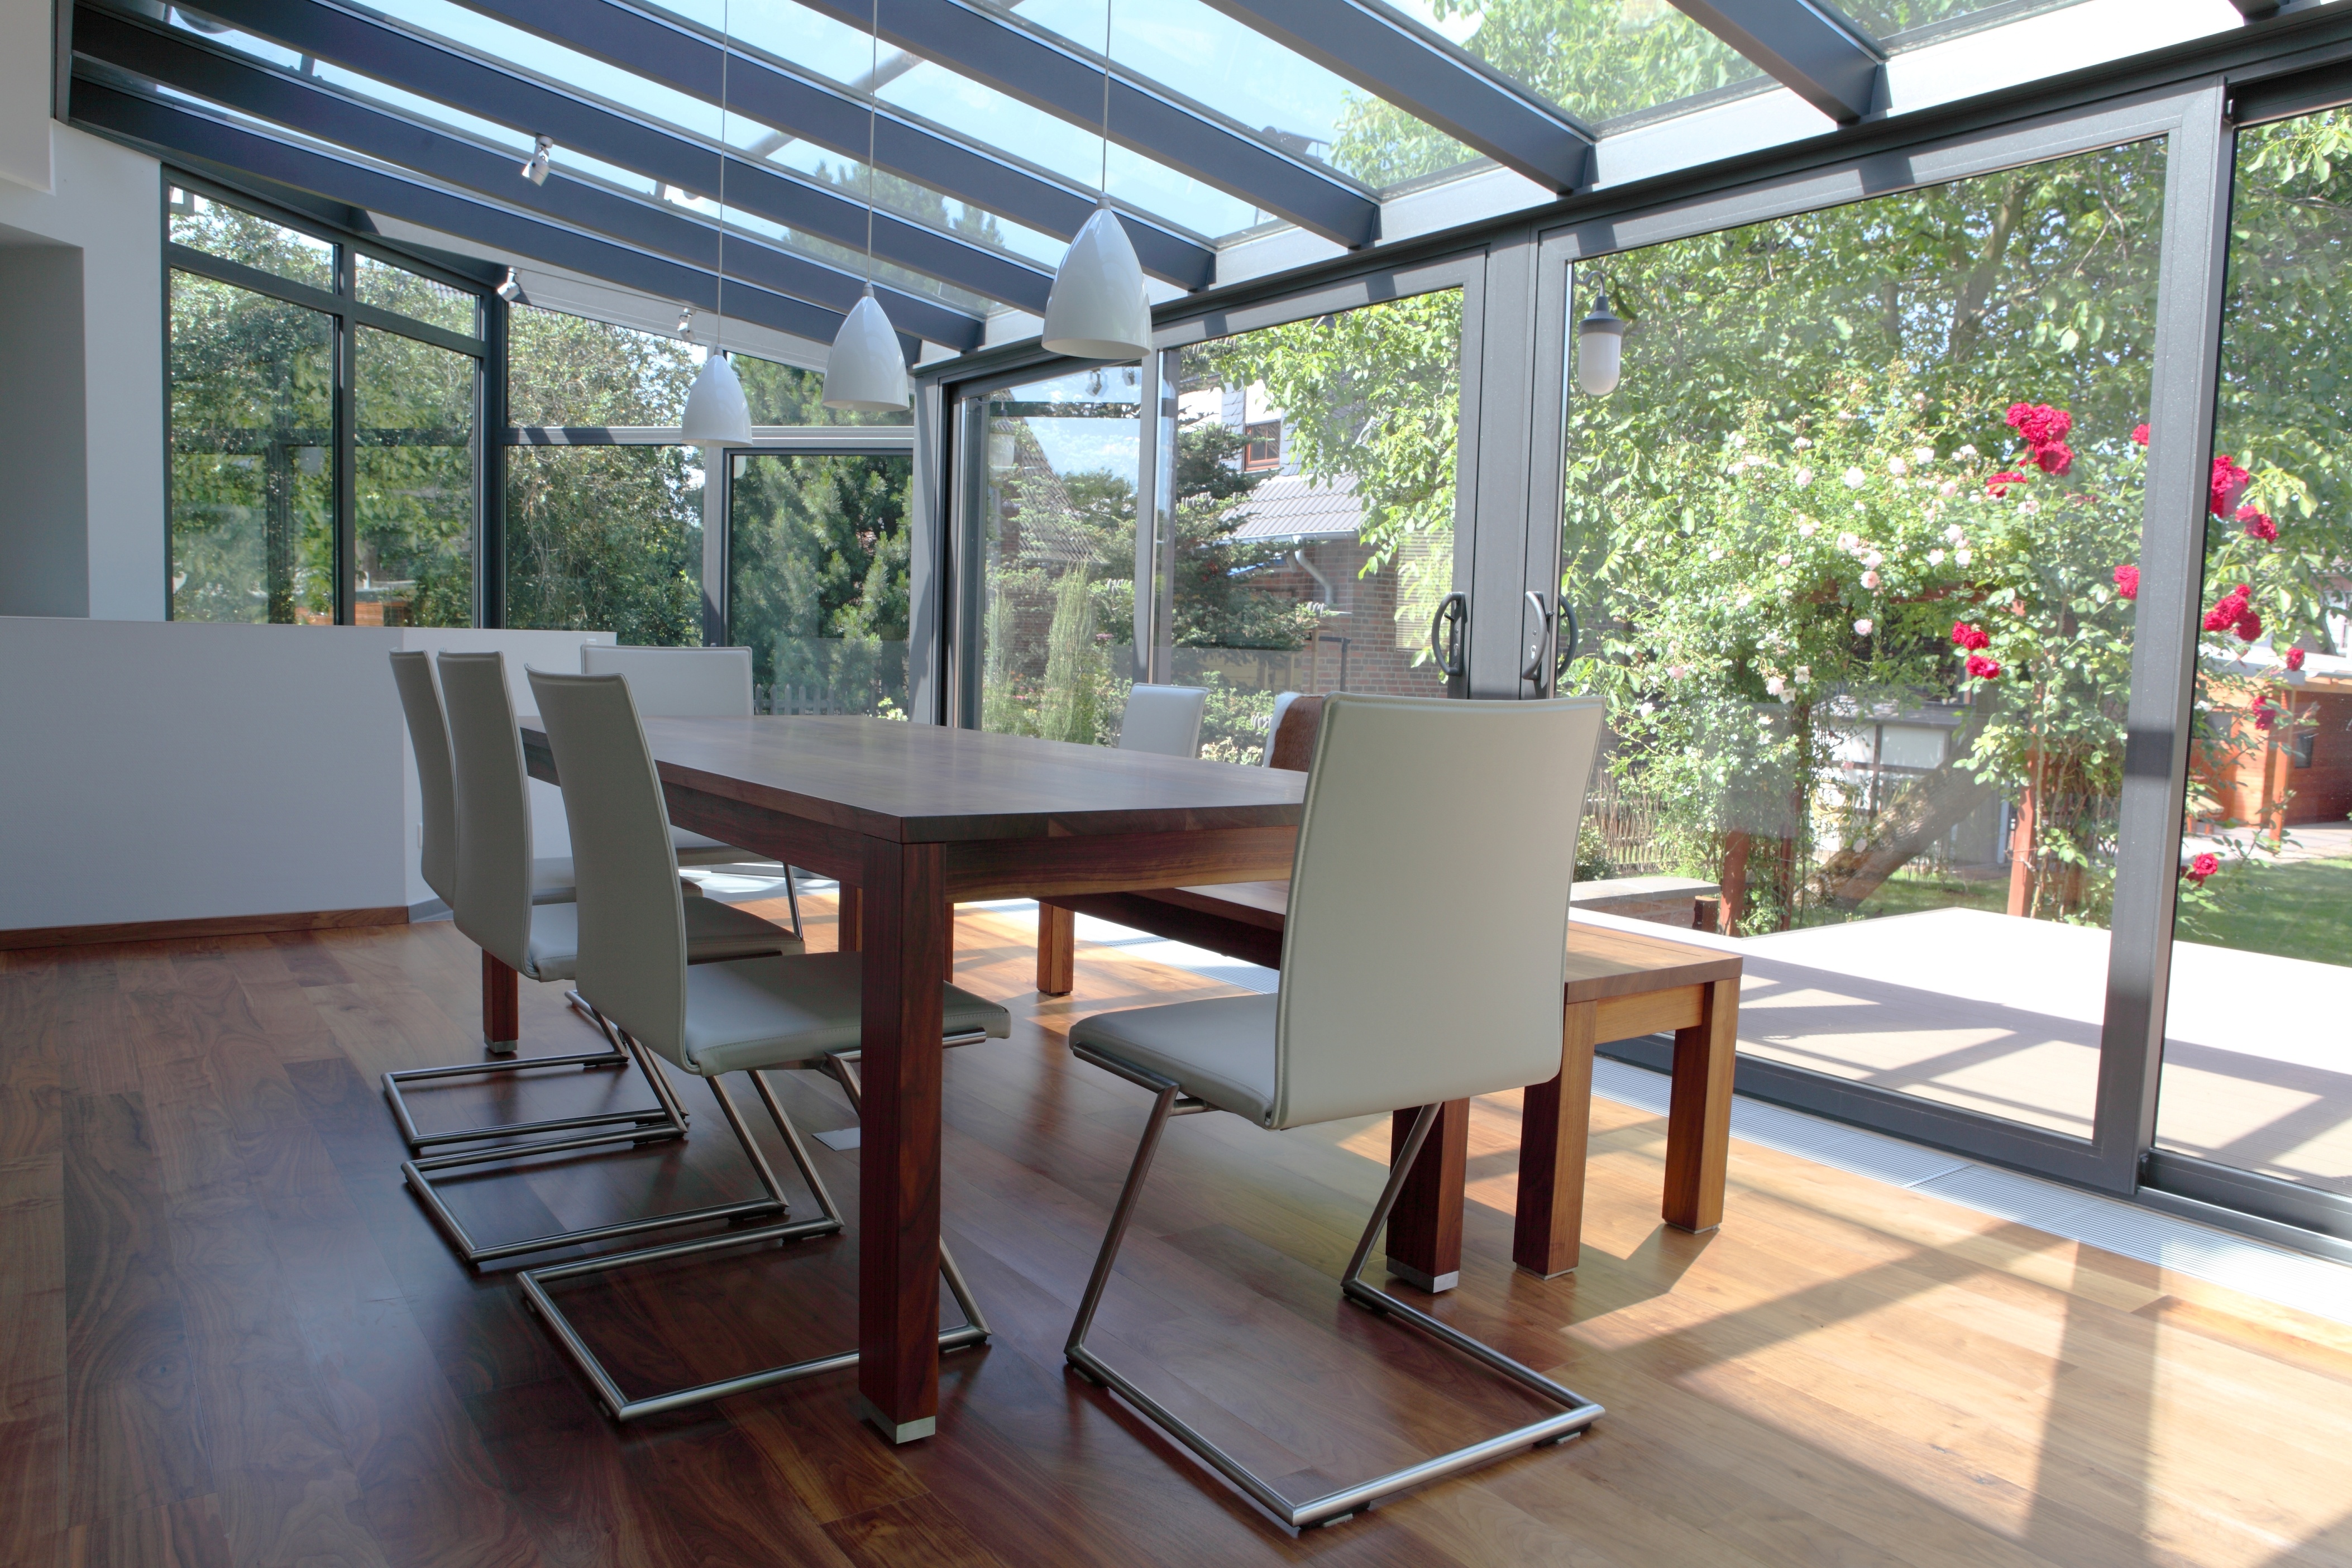 No planning permission required on many conservatories